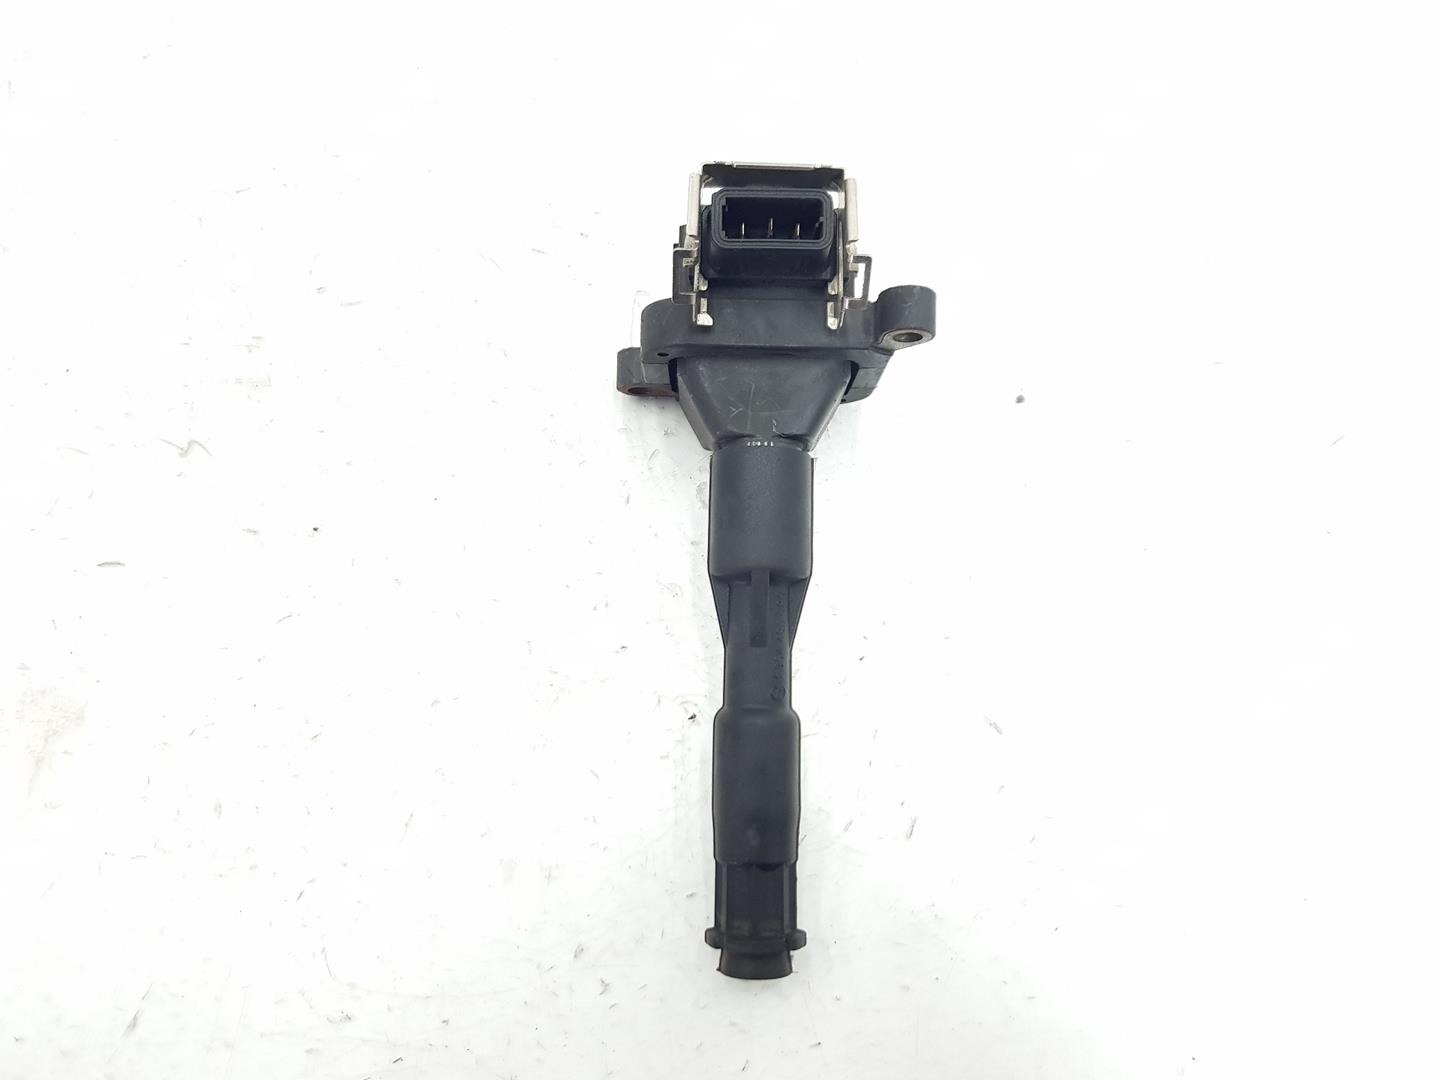 BMW 5 Series E39 (1995-2004) High Voltage Ignition Coil 12131740477, 1703227, 0221504004 19812258